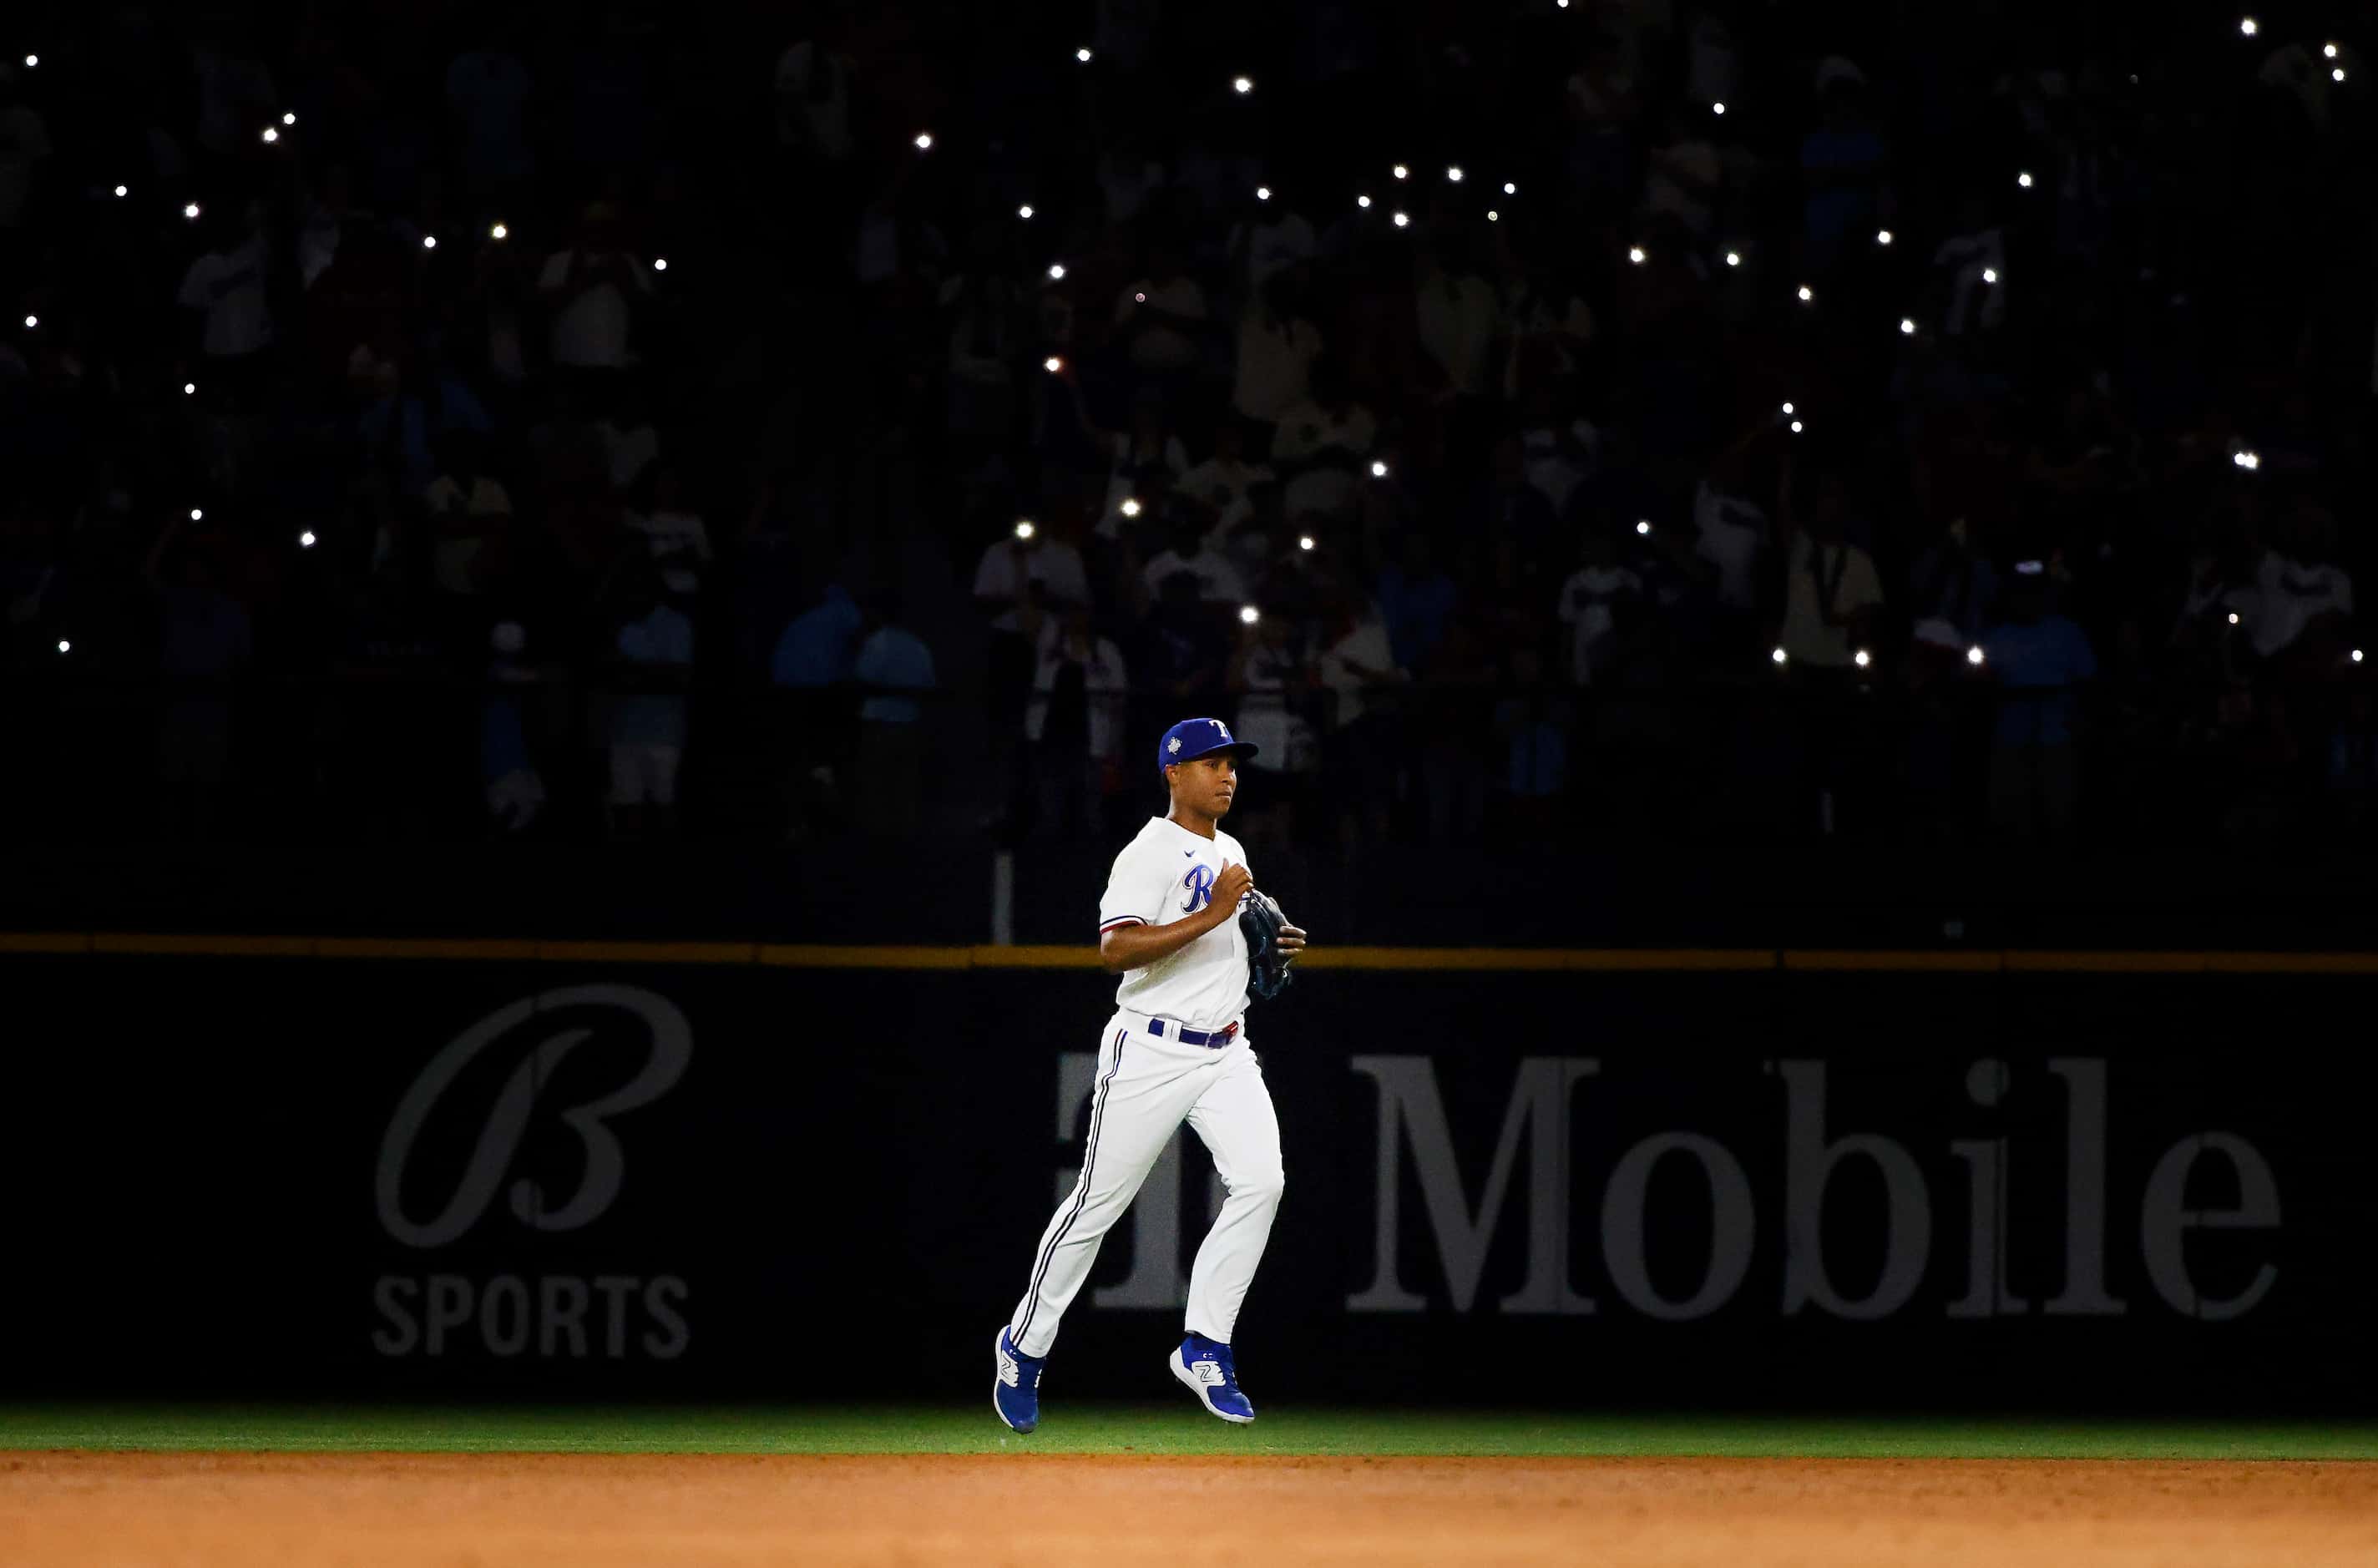 With the lights dimmed and smartphone lights on, Texas Rangers relief pitcher Jose Leclerc...